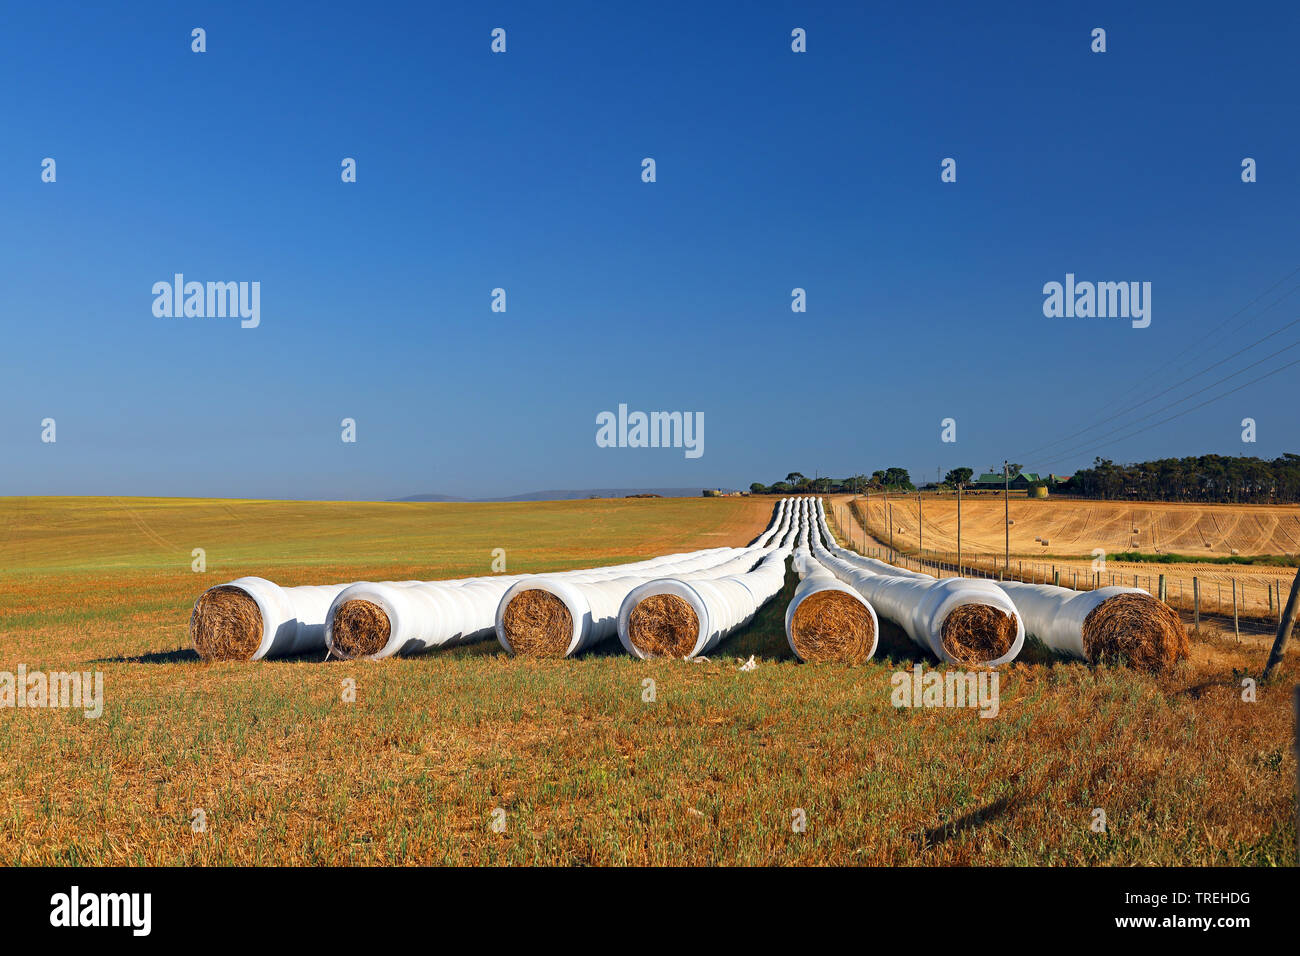 Tubes of straw in the cultural landscape near Overberg, South Africa Stock Photo